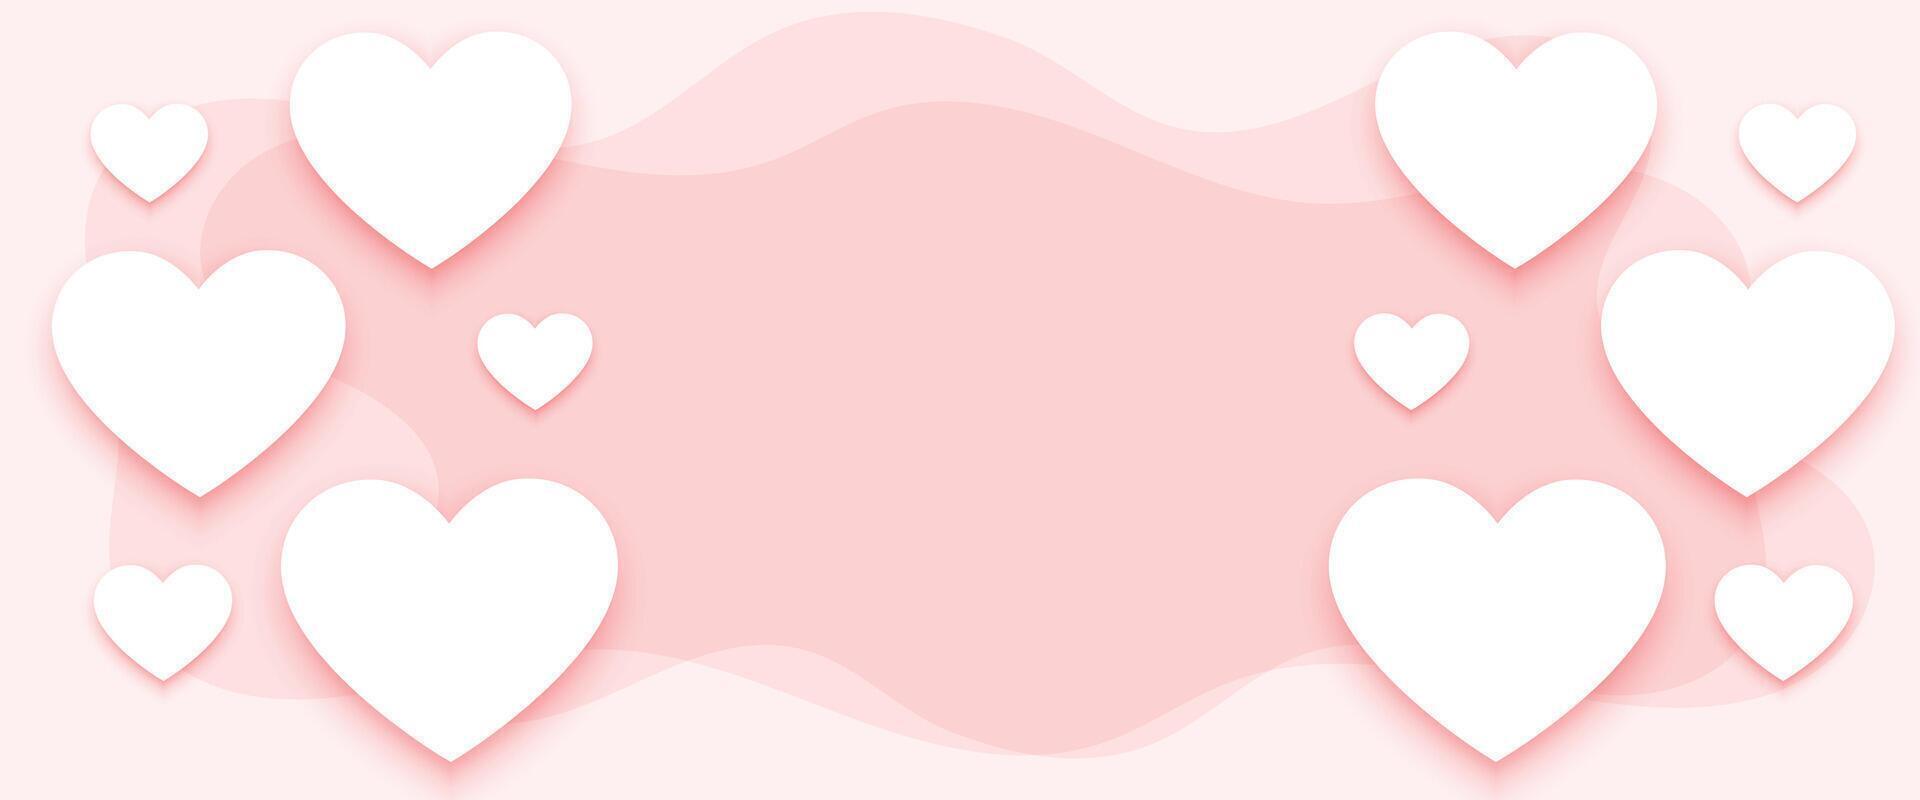 lovely valentines day banner with hearts and affection for lover vector